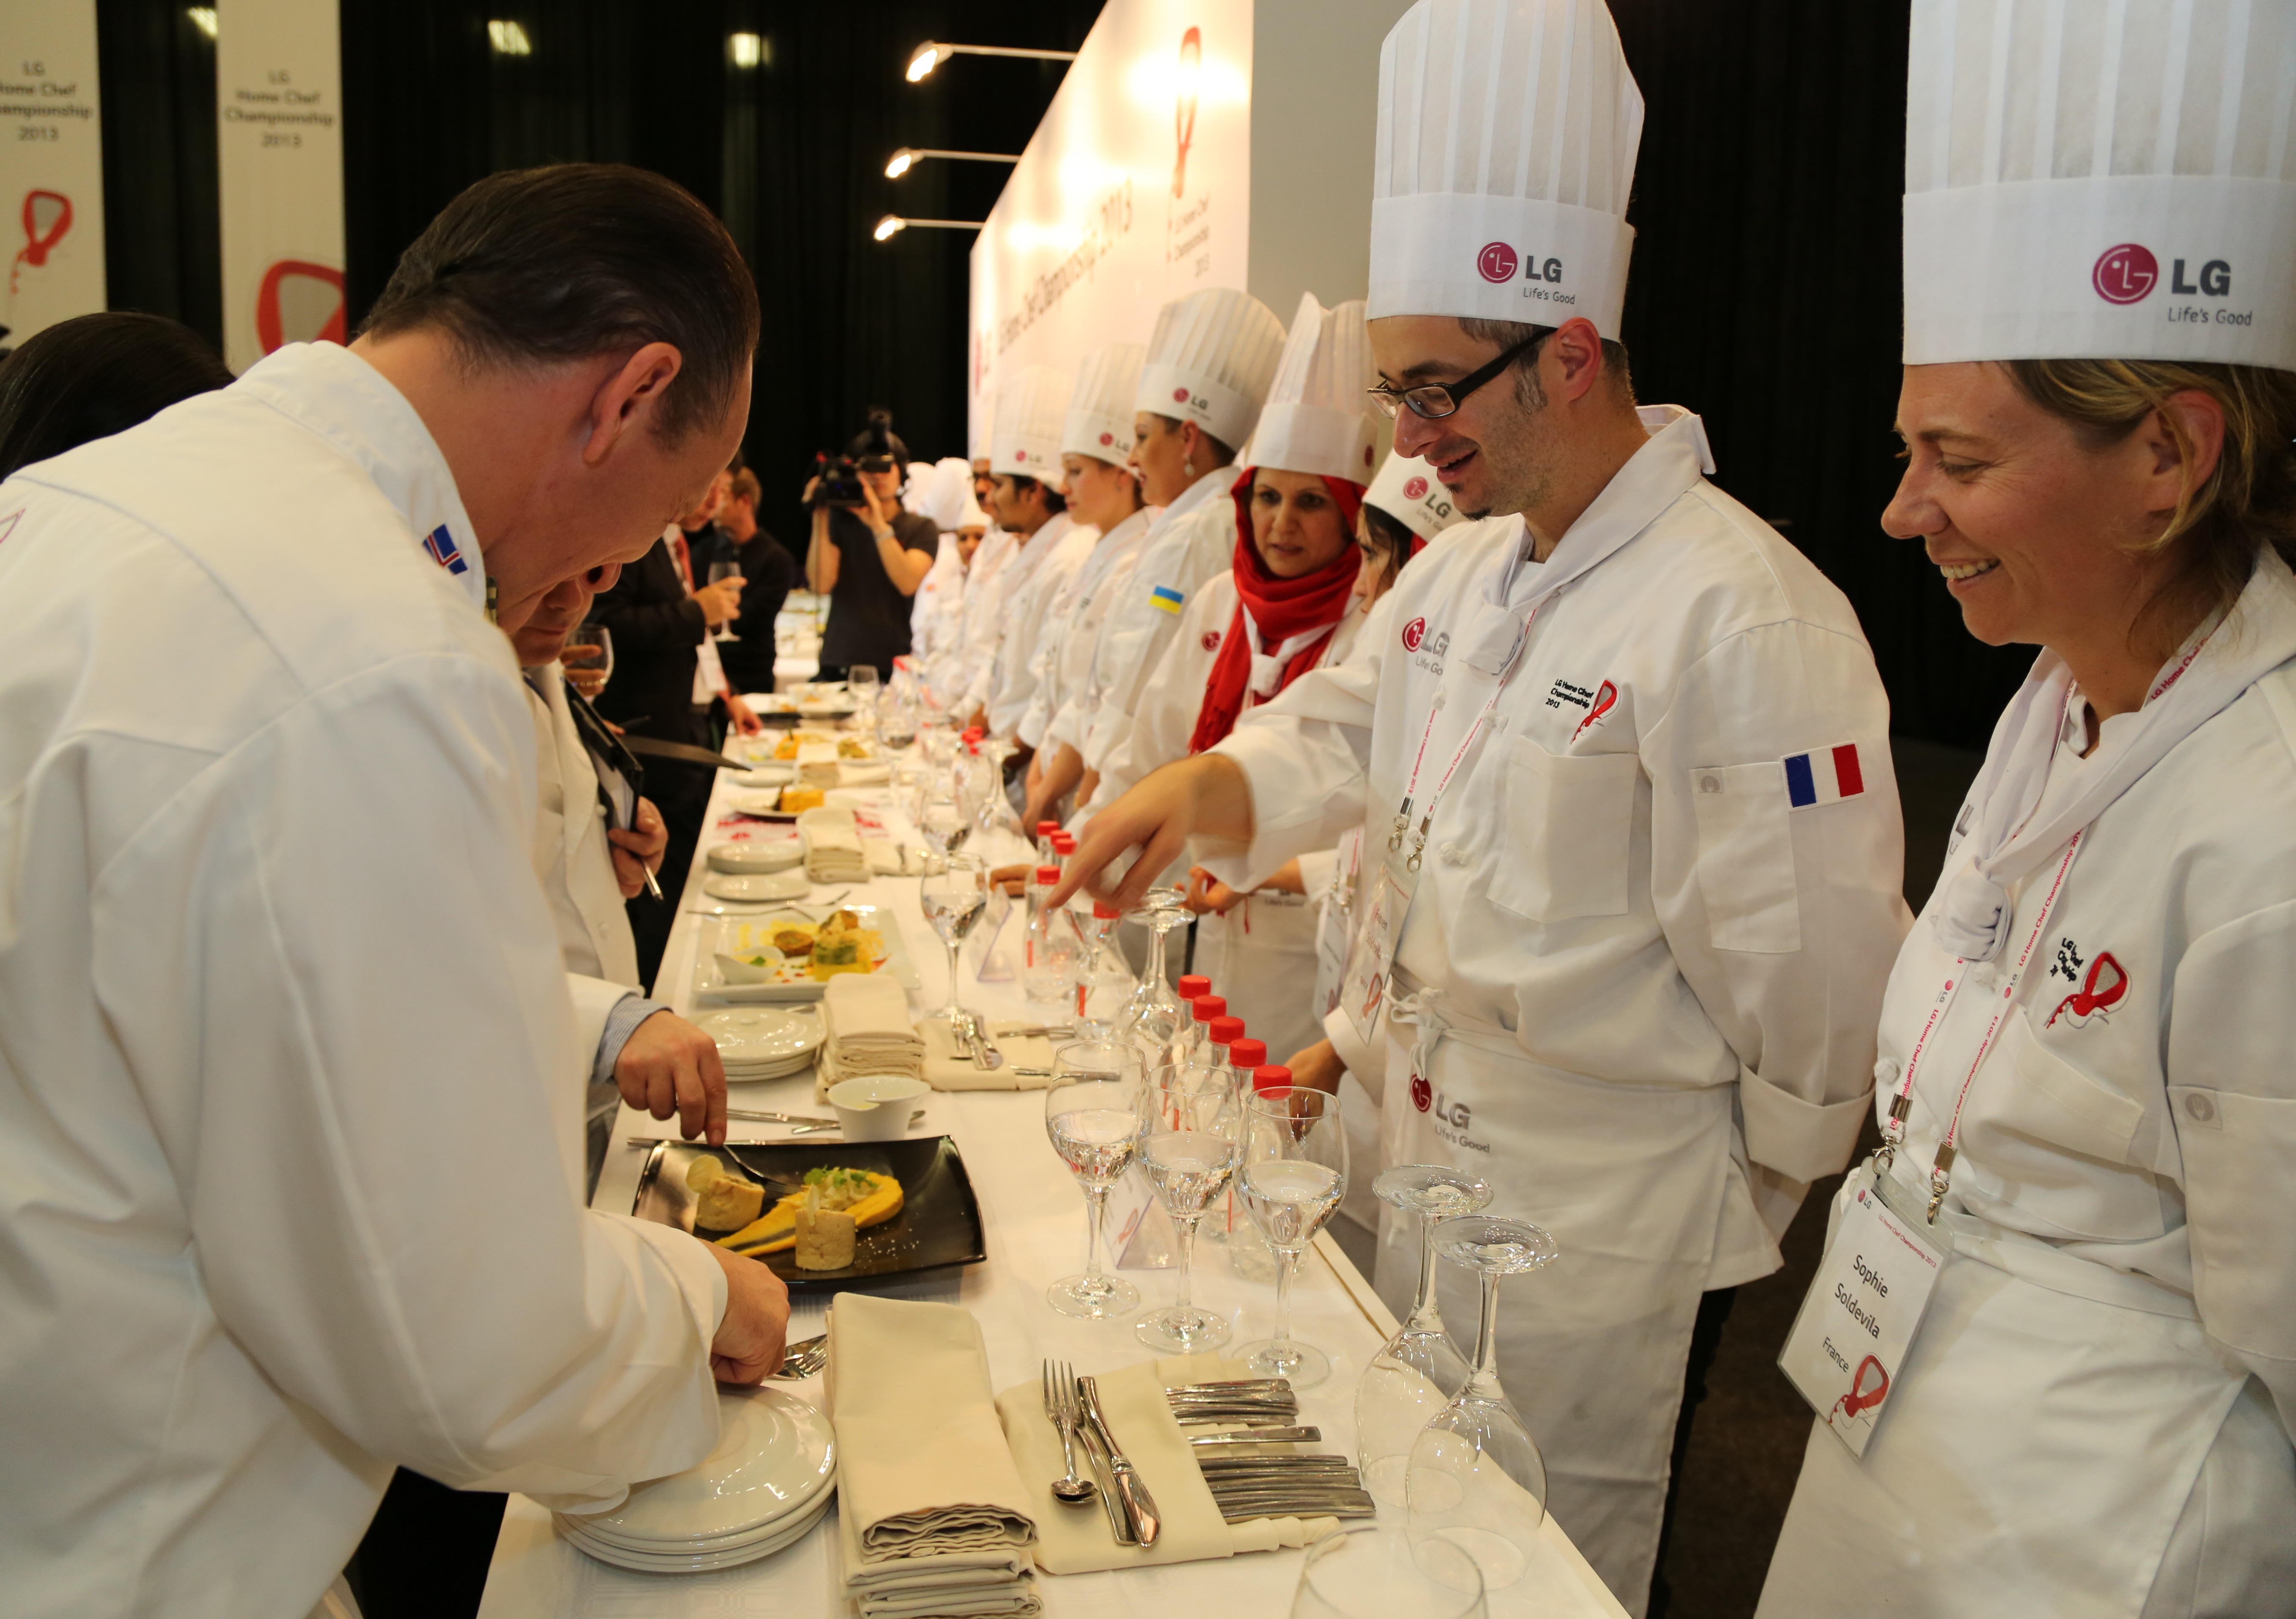 Participating chefs explain their dishes to the judges